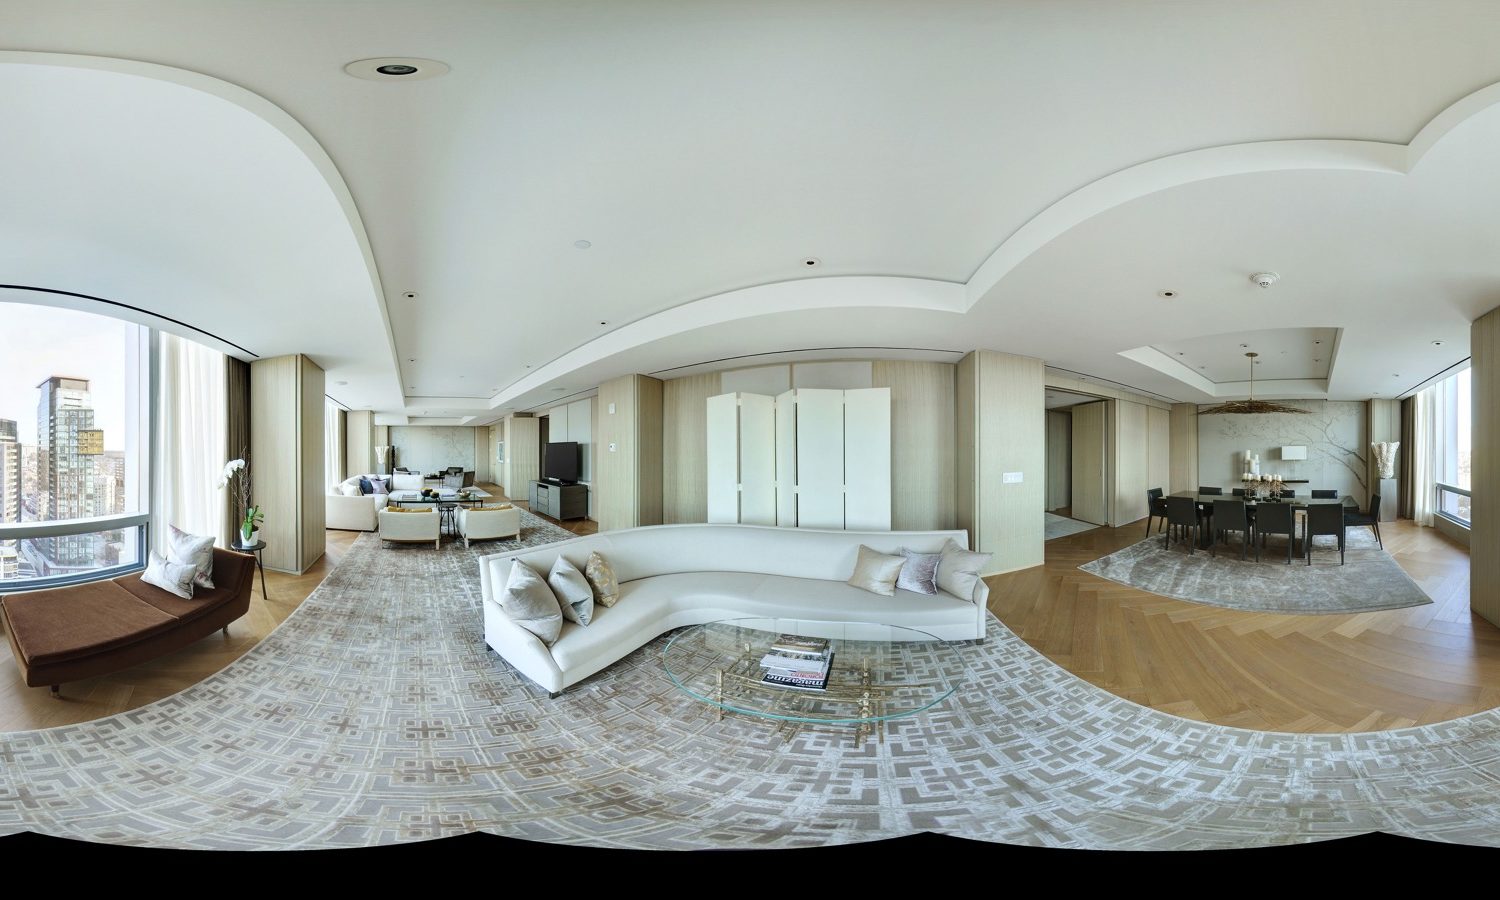 360 Photography: How to Photograph Interiors